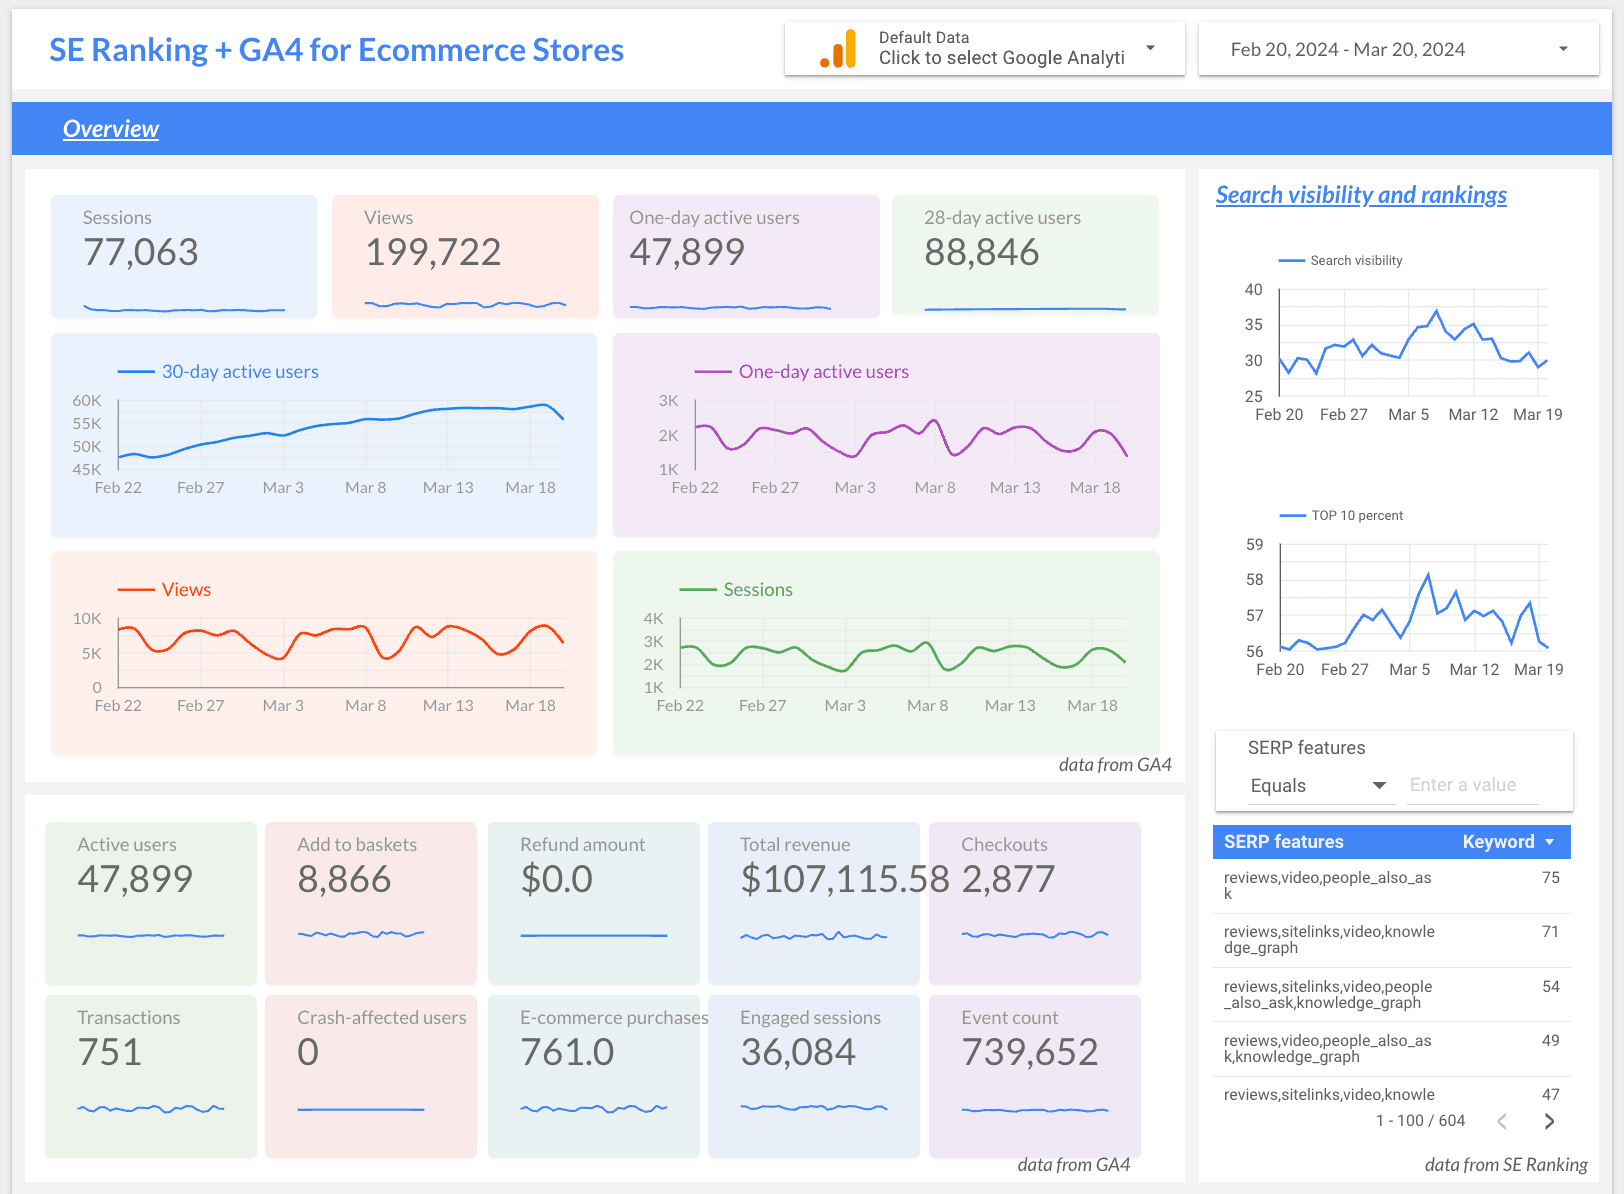 Overview of the ecommerce dashboard